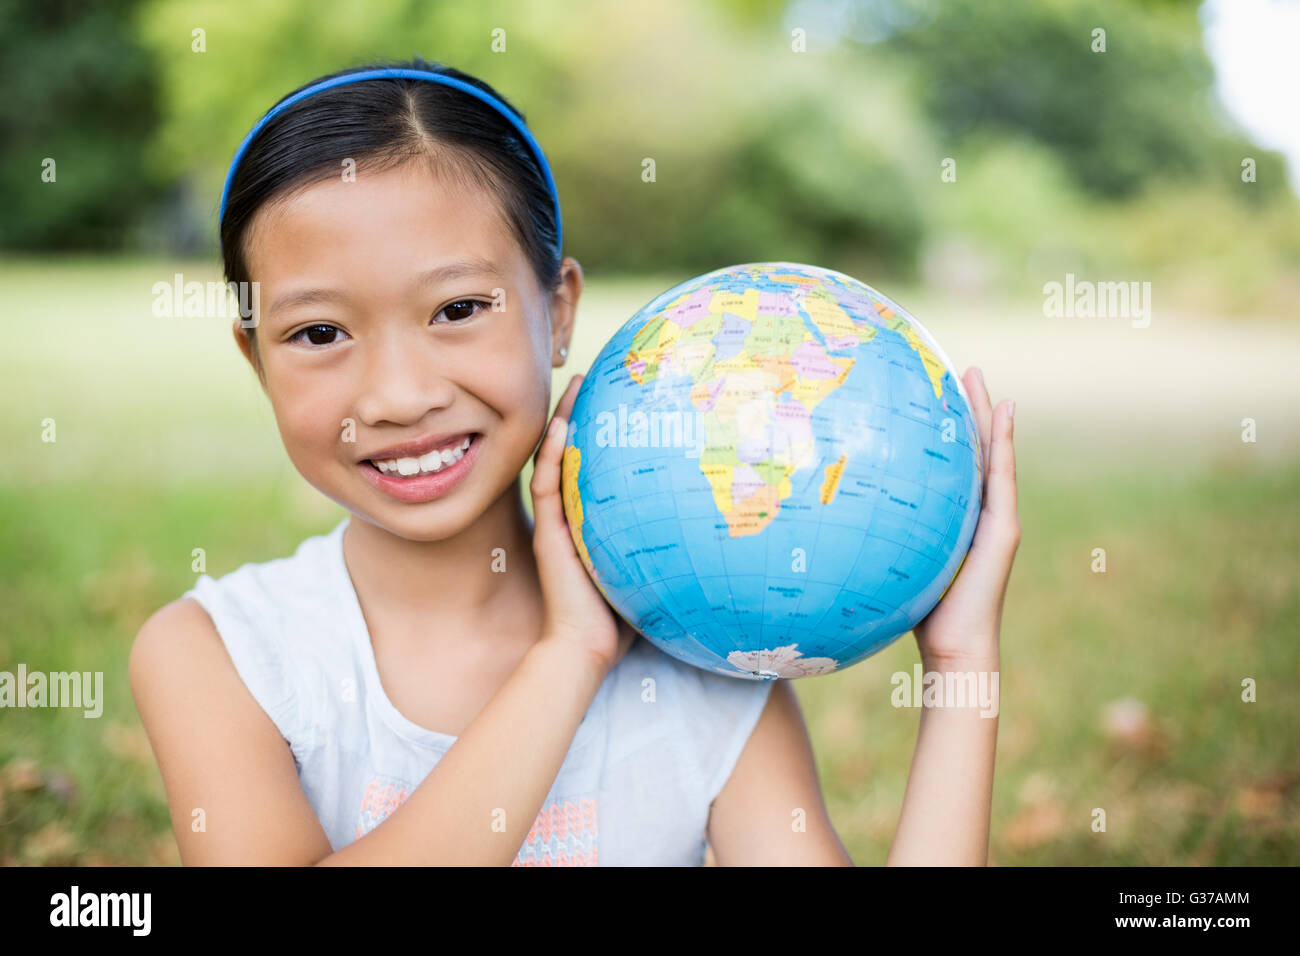 Portrait of smiling girl carrying a globe on her shoulder Stock Photo